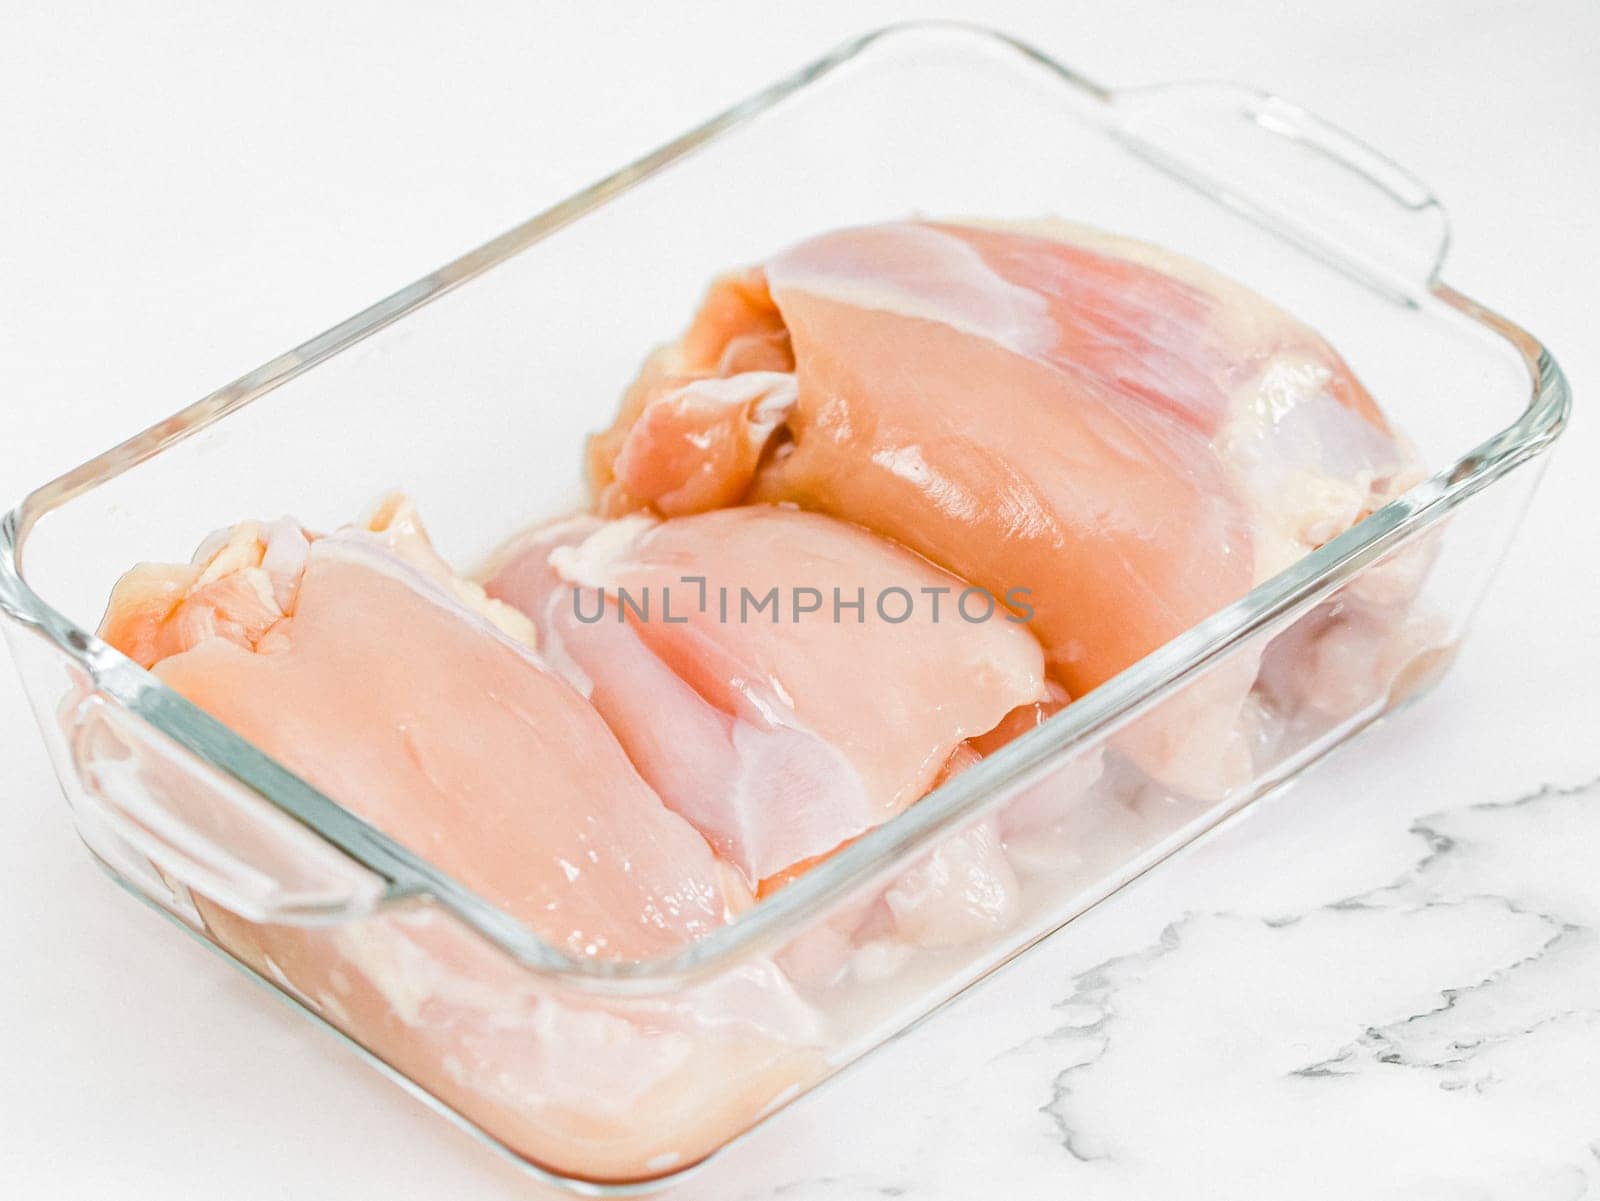 Raw boneless chicken thigh meat lies in a glass baking dish on a white marble by Nataliya